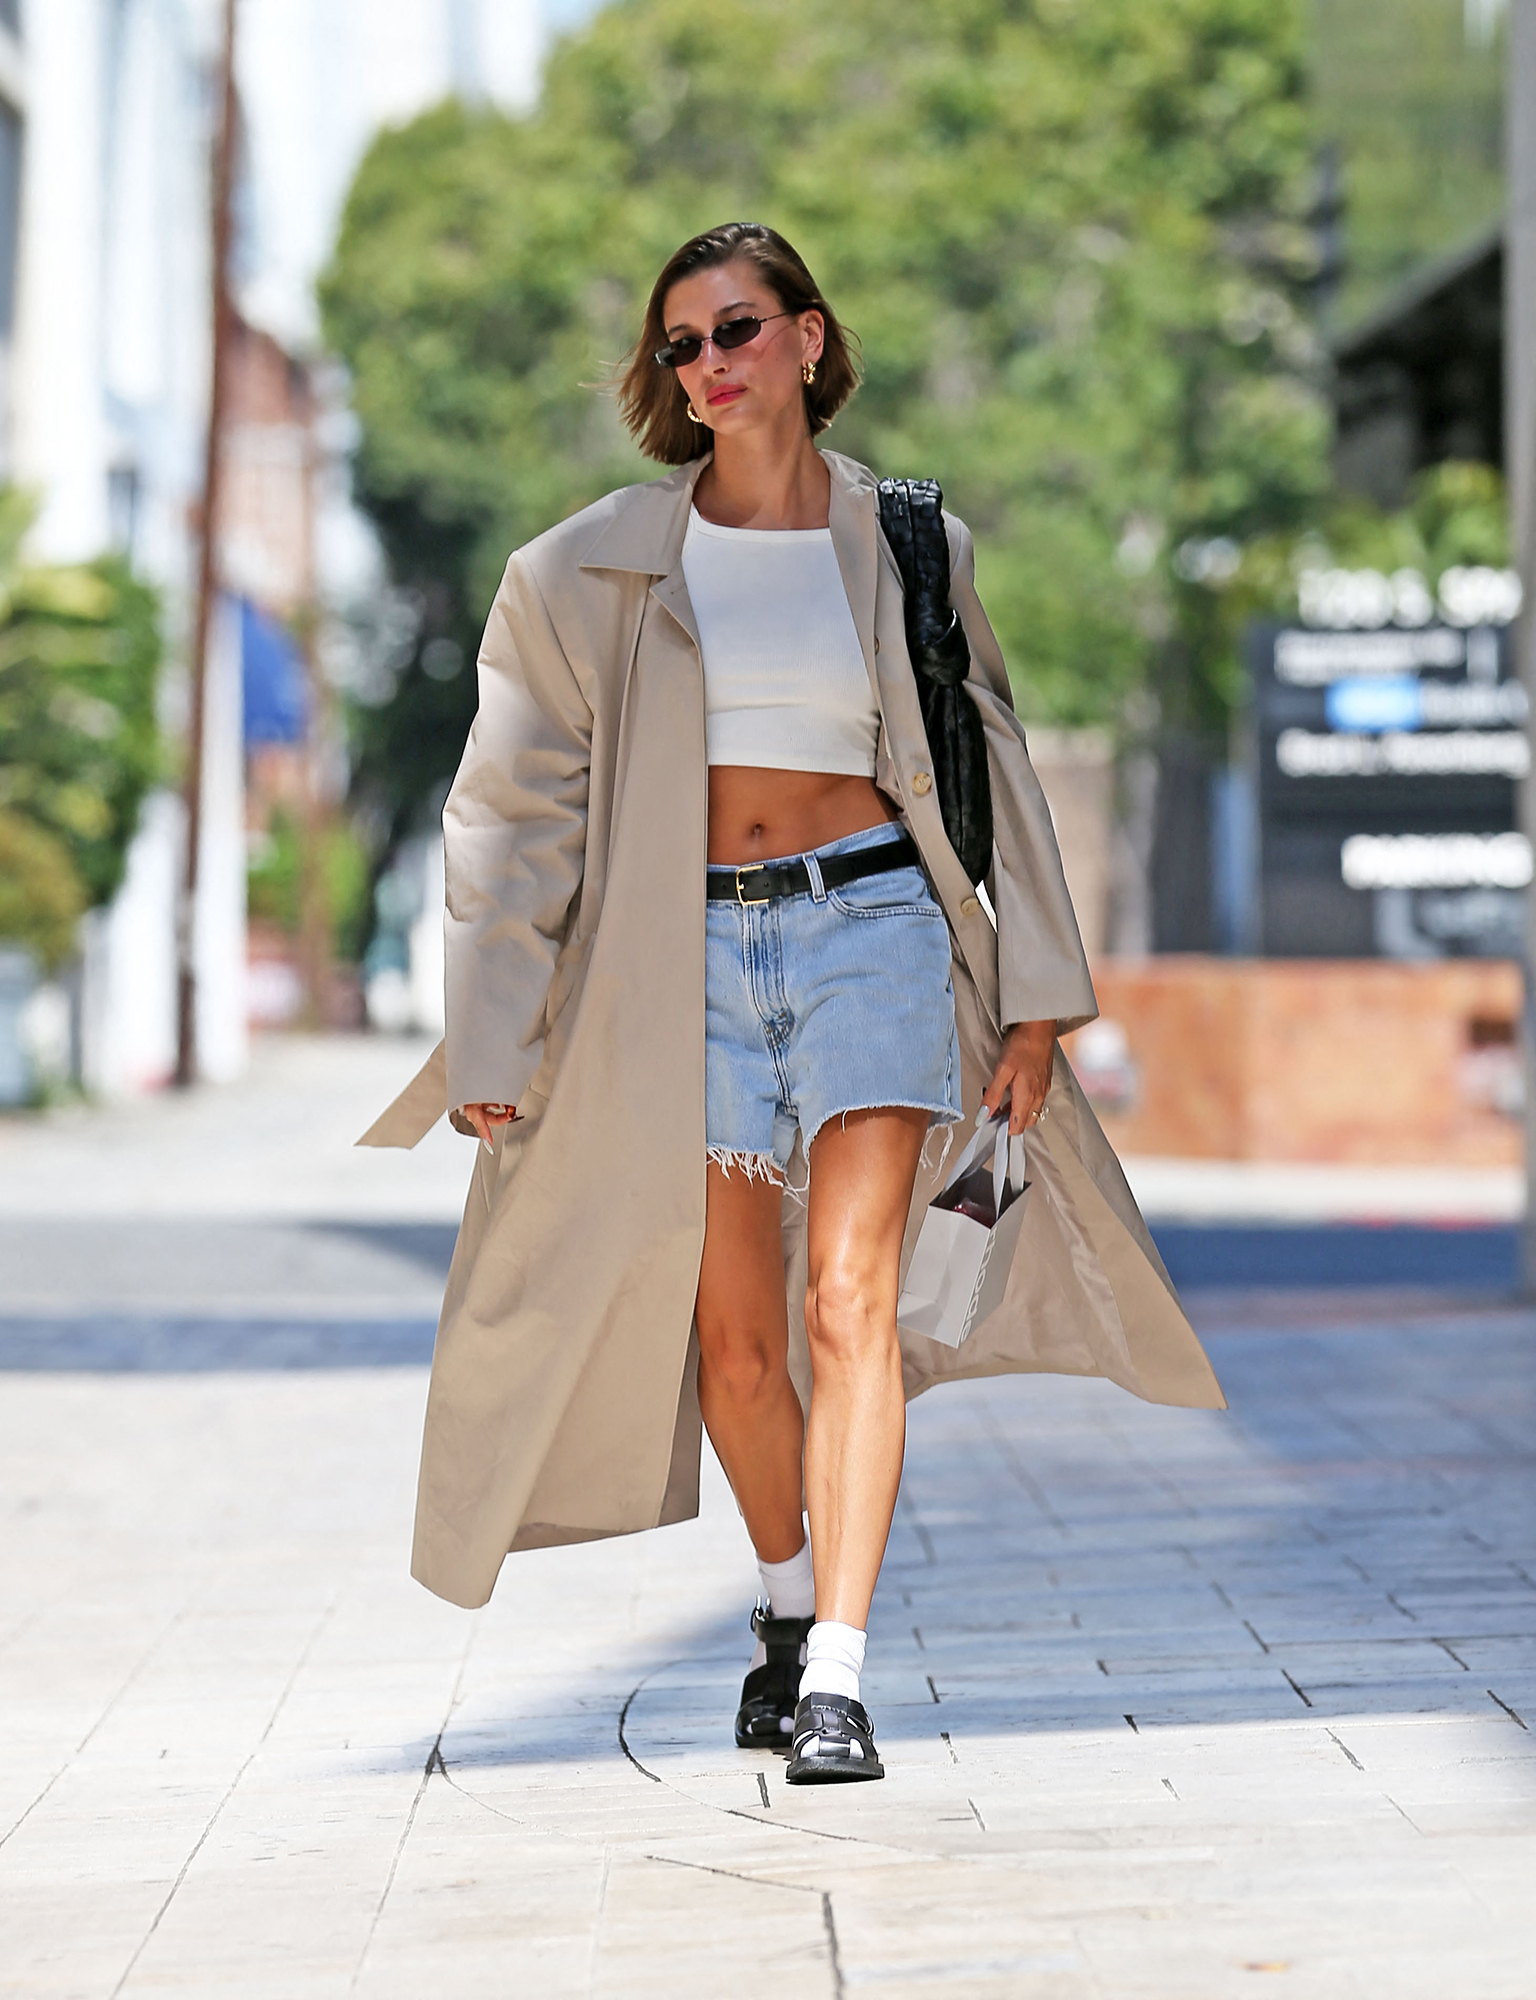 Hailey Bieber wears baggy jeans during a shopping trip in Los Angeles